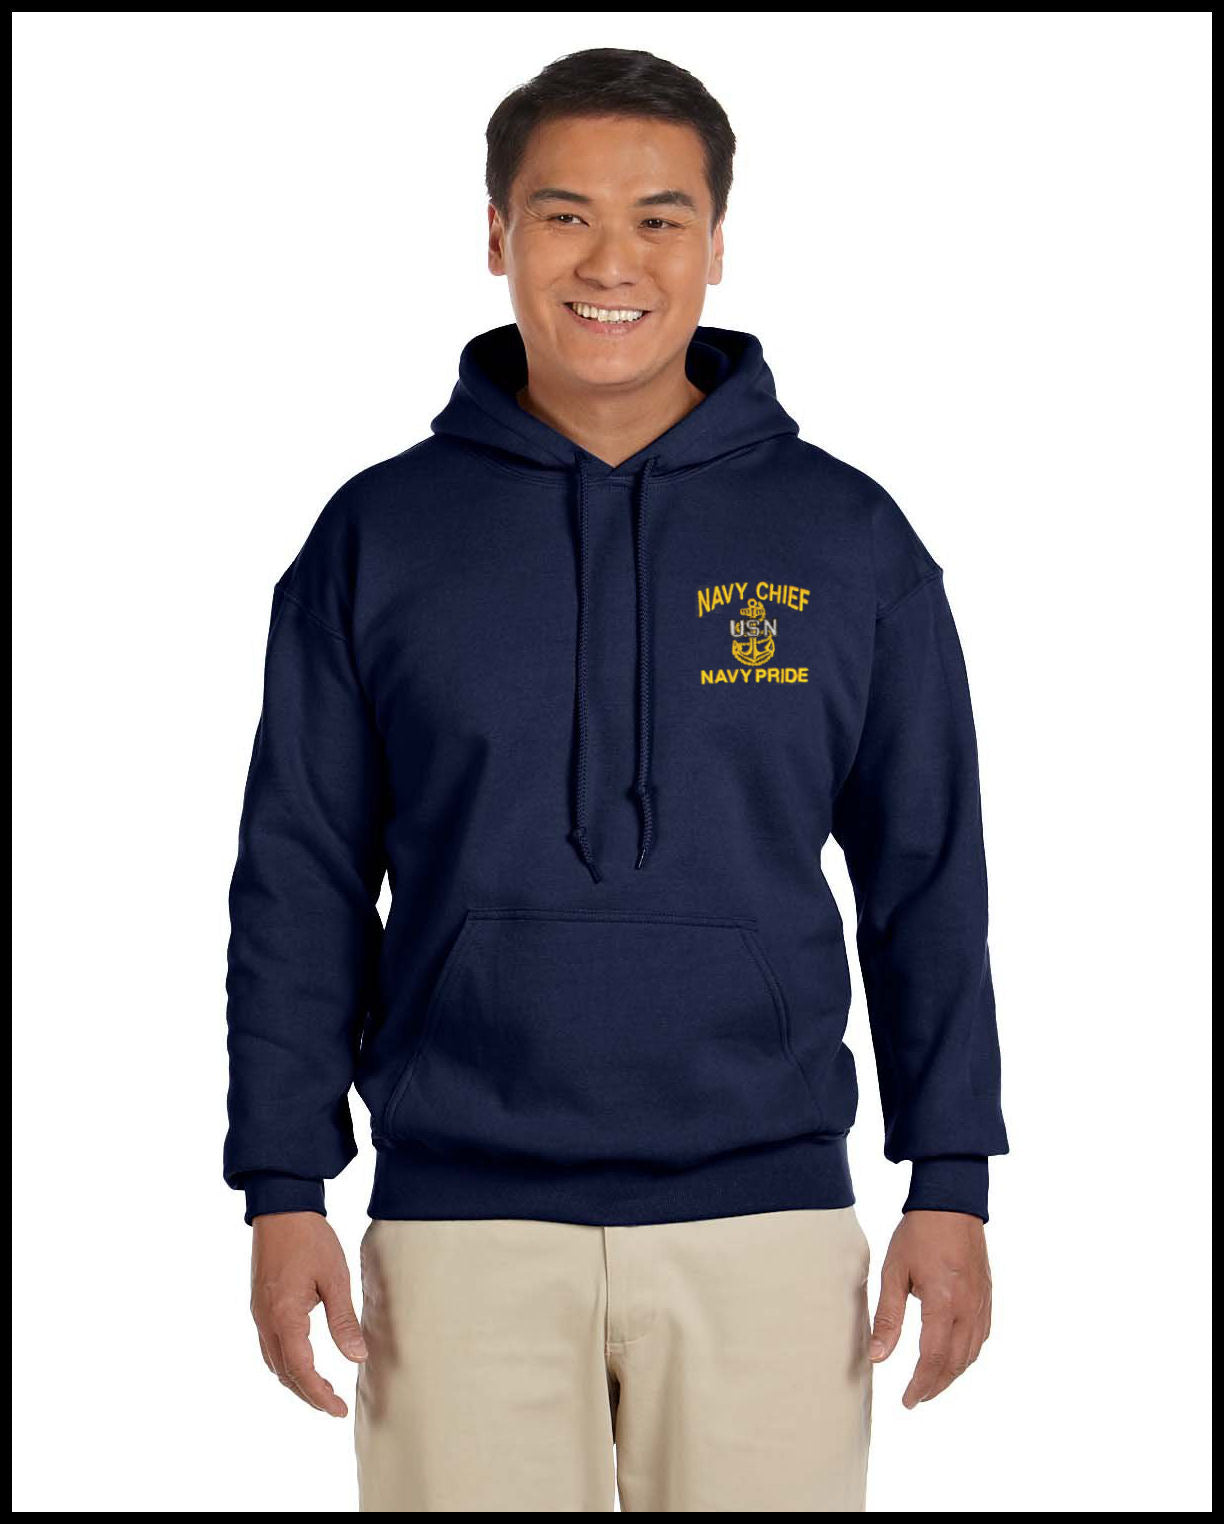 Navy Chief Navy Pride Embroidered Navy Blue Hooded Sweatshirt